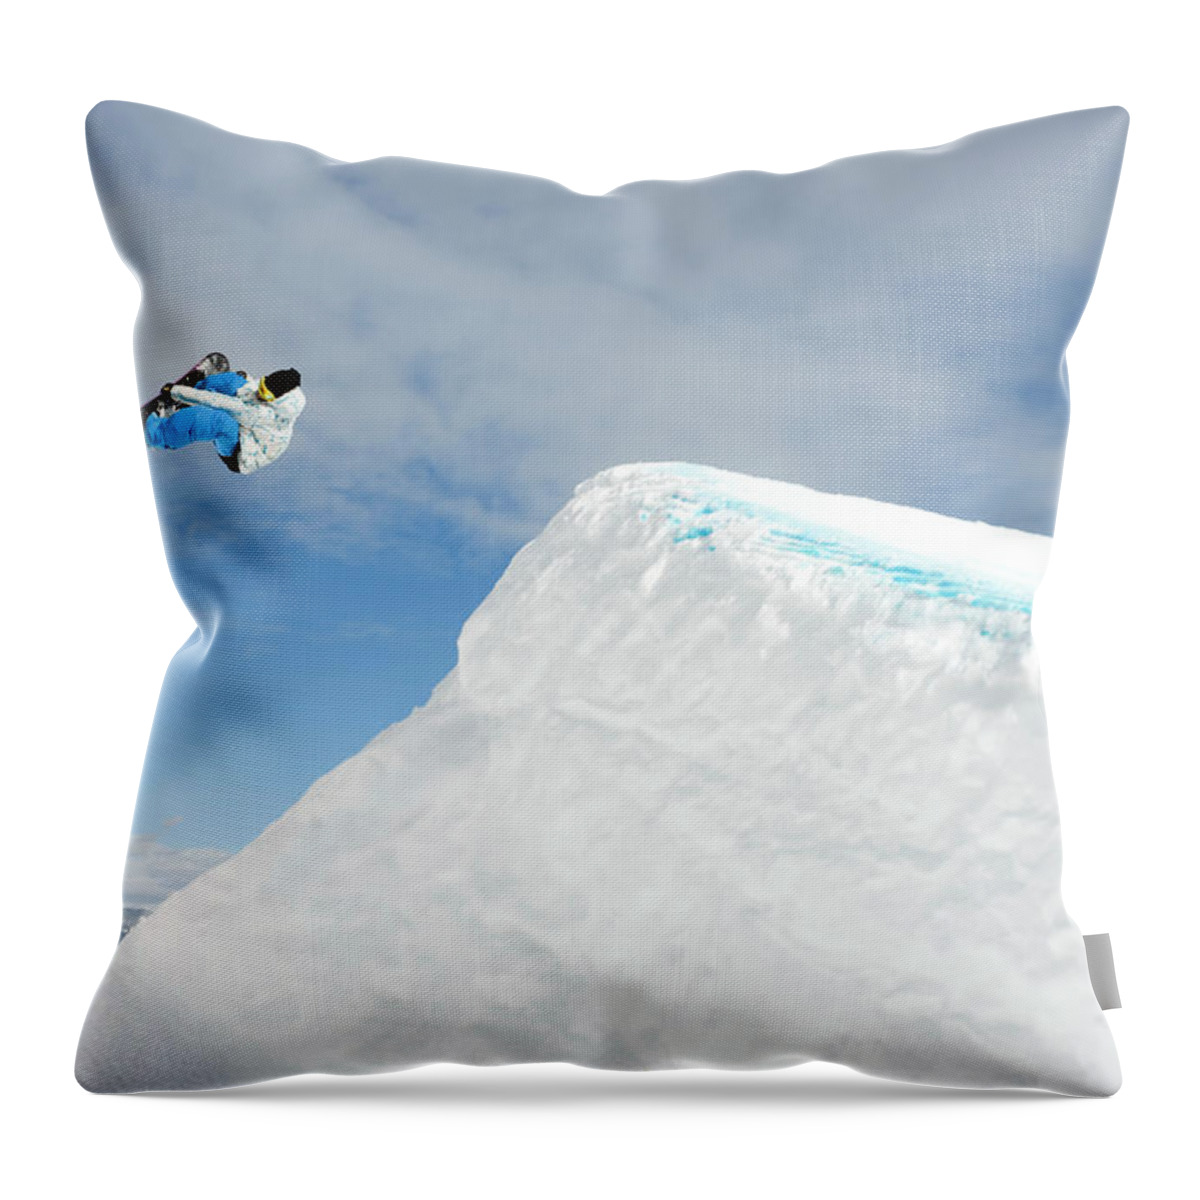 Aspen Throw Pillow featuring the photograph Snowboarder In Terrain Park by John P Kelly